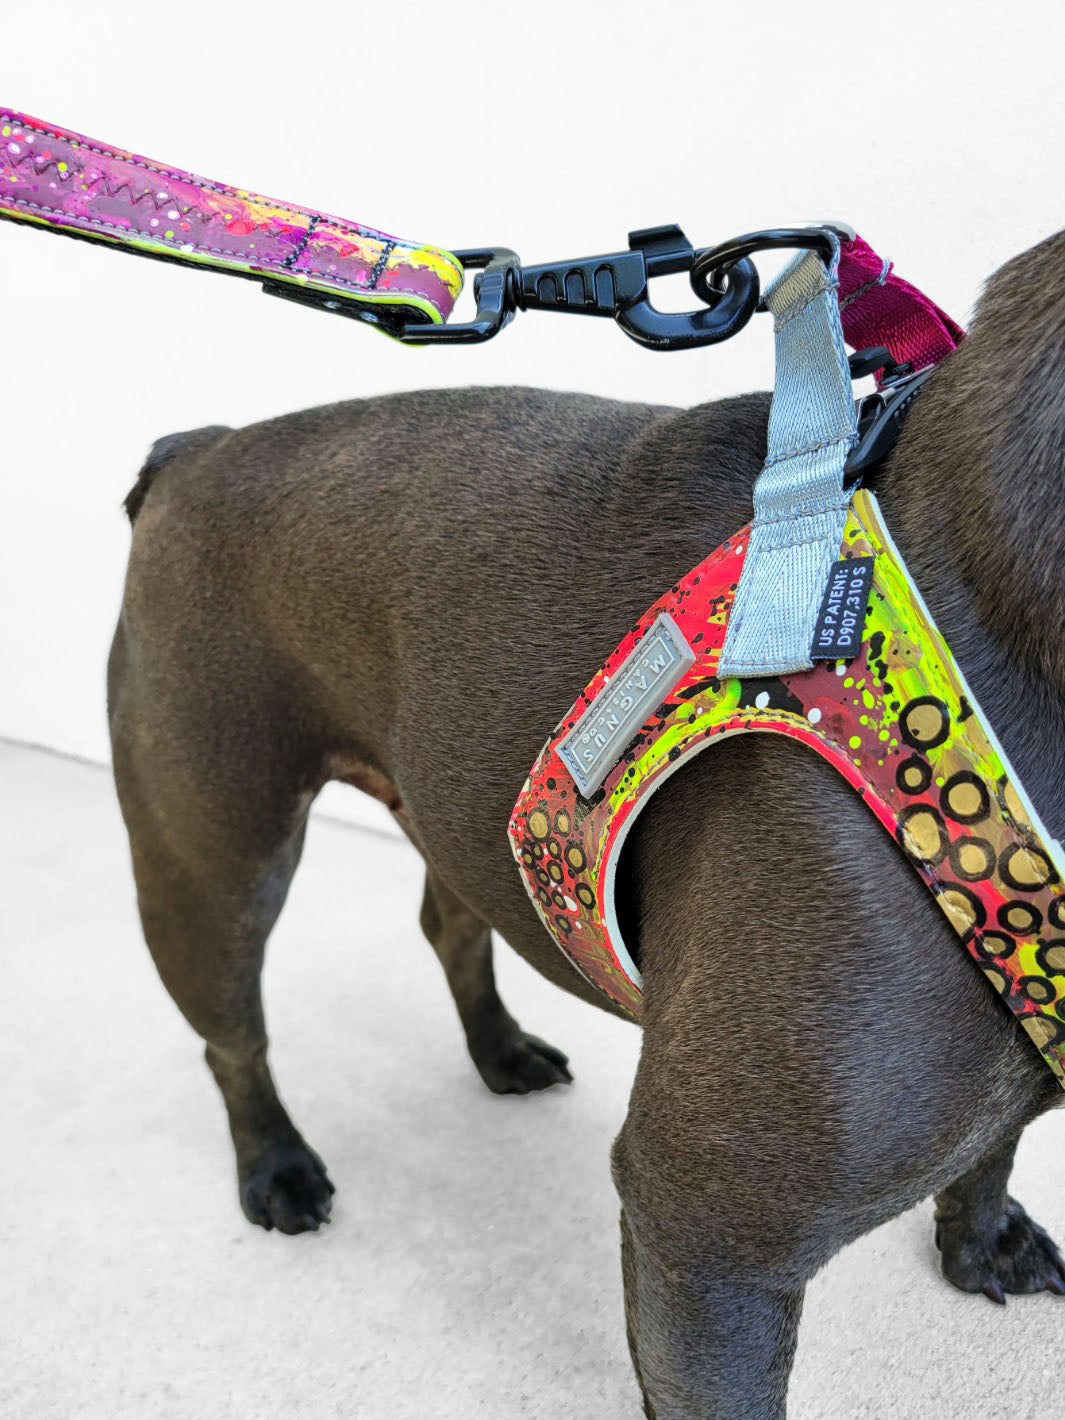 Shoulder view of a dog harness.